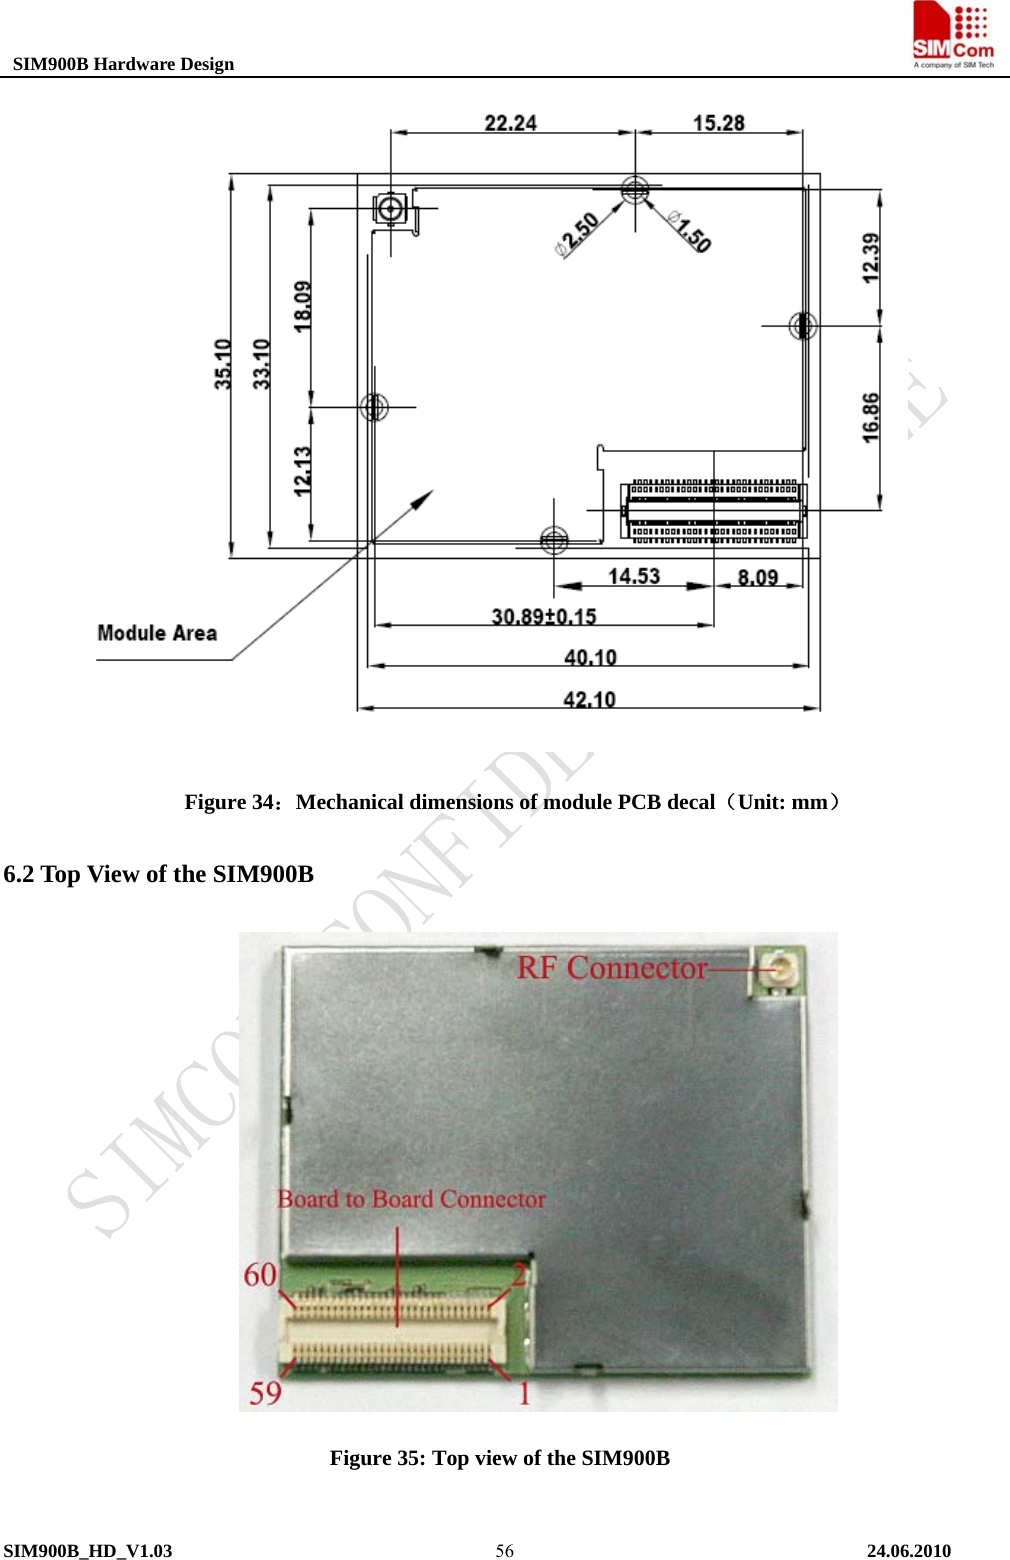  SIM900B Hardware Design                                                                              Figure 34：Mechanical dimensions of module PCB decal（Unit: mm） 6.2 Top View of the SIM900B  Figure 35: Top view of the SIM900B SIM900B_HD_V1.03                                                                          24.06.2010  56